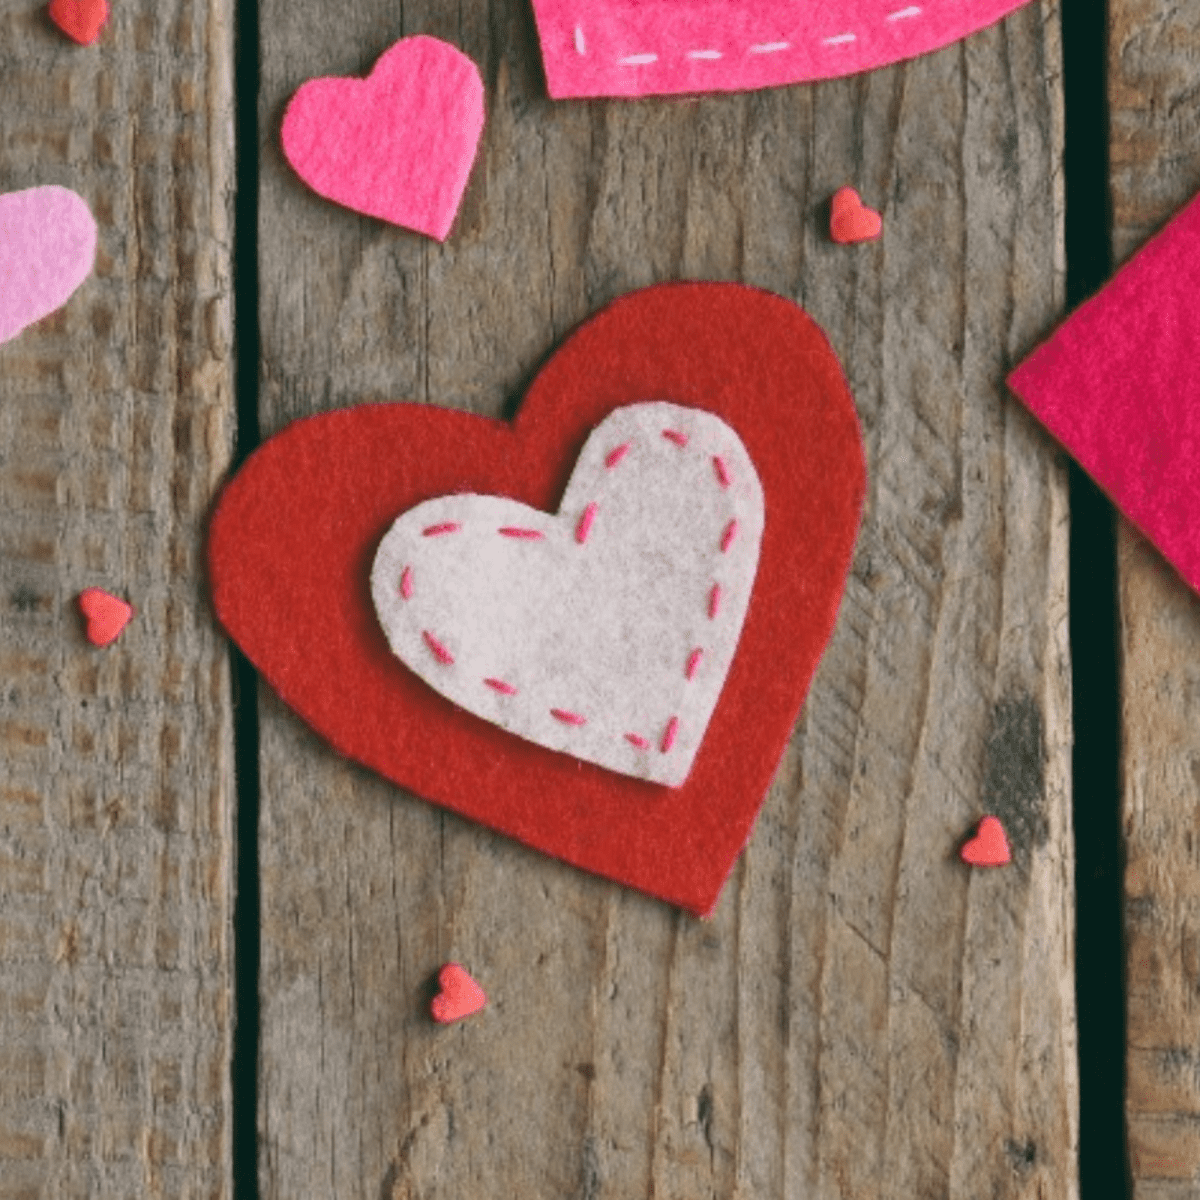 Popsicle Stick Heart Garland Craft to Make for Valentine's Day